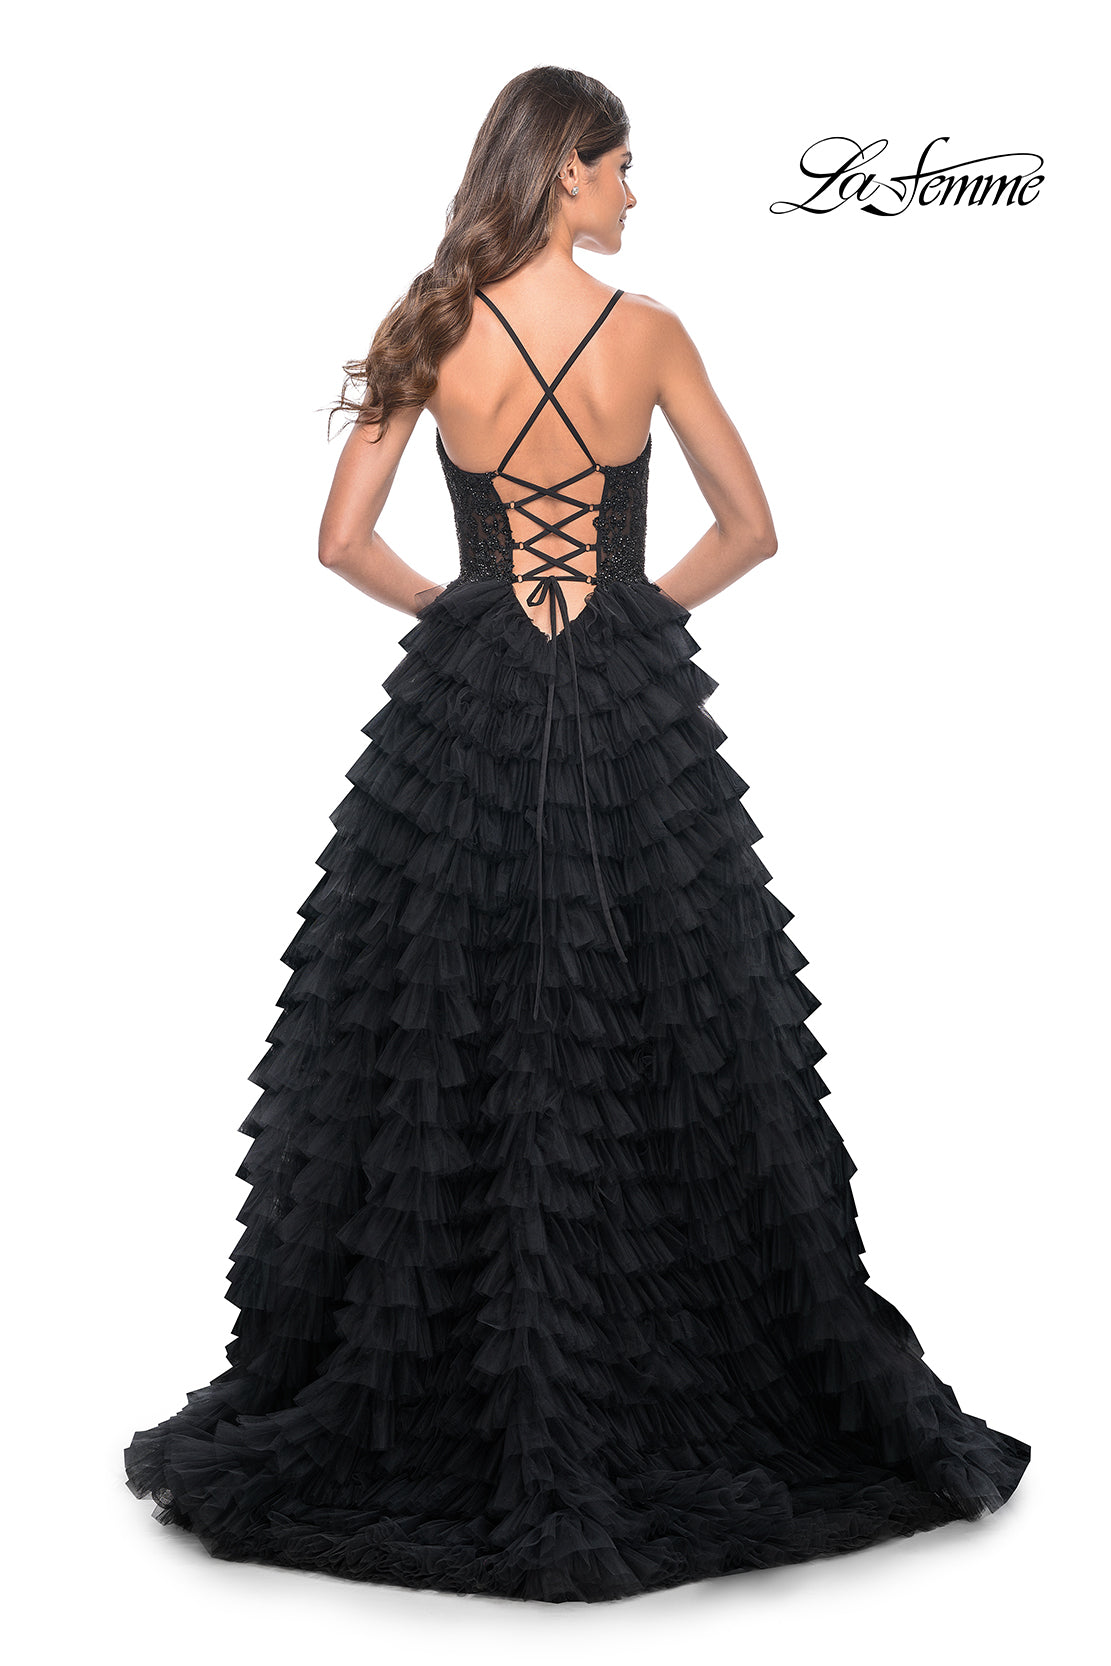 La-Femme-32128-Sweetheart-Neckline-Lace-up-Back-High-Slit-Lace-Tulle-Ball-Gowns-Black-Evening-Dress-B-Chic-Fashions-Prom-Dress